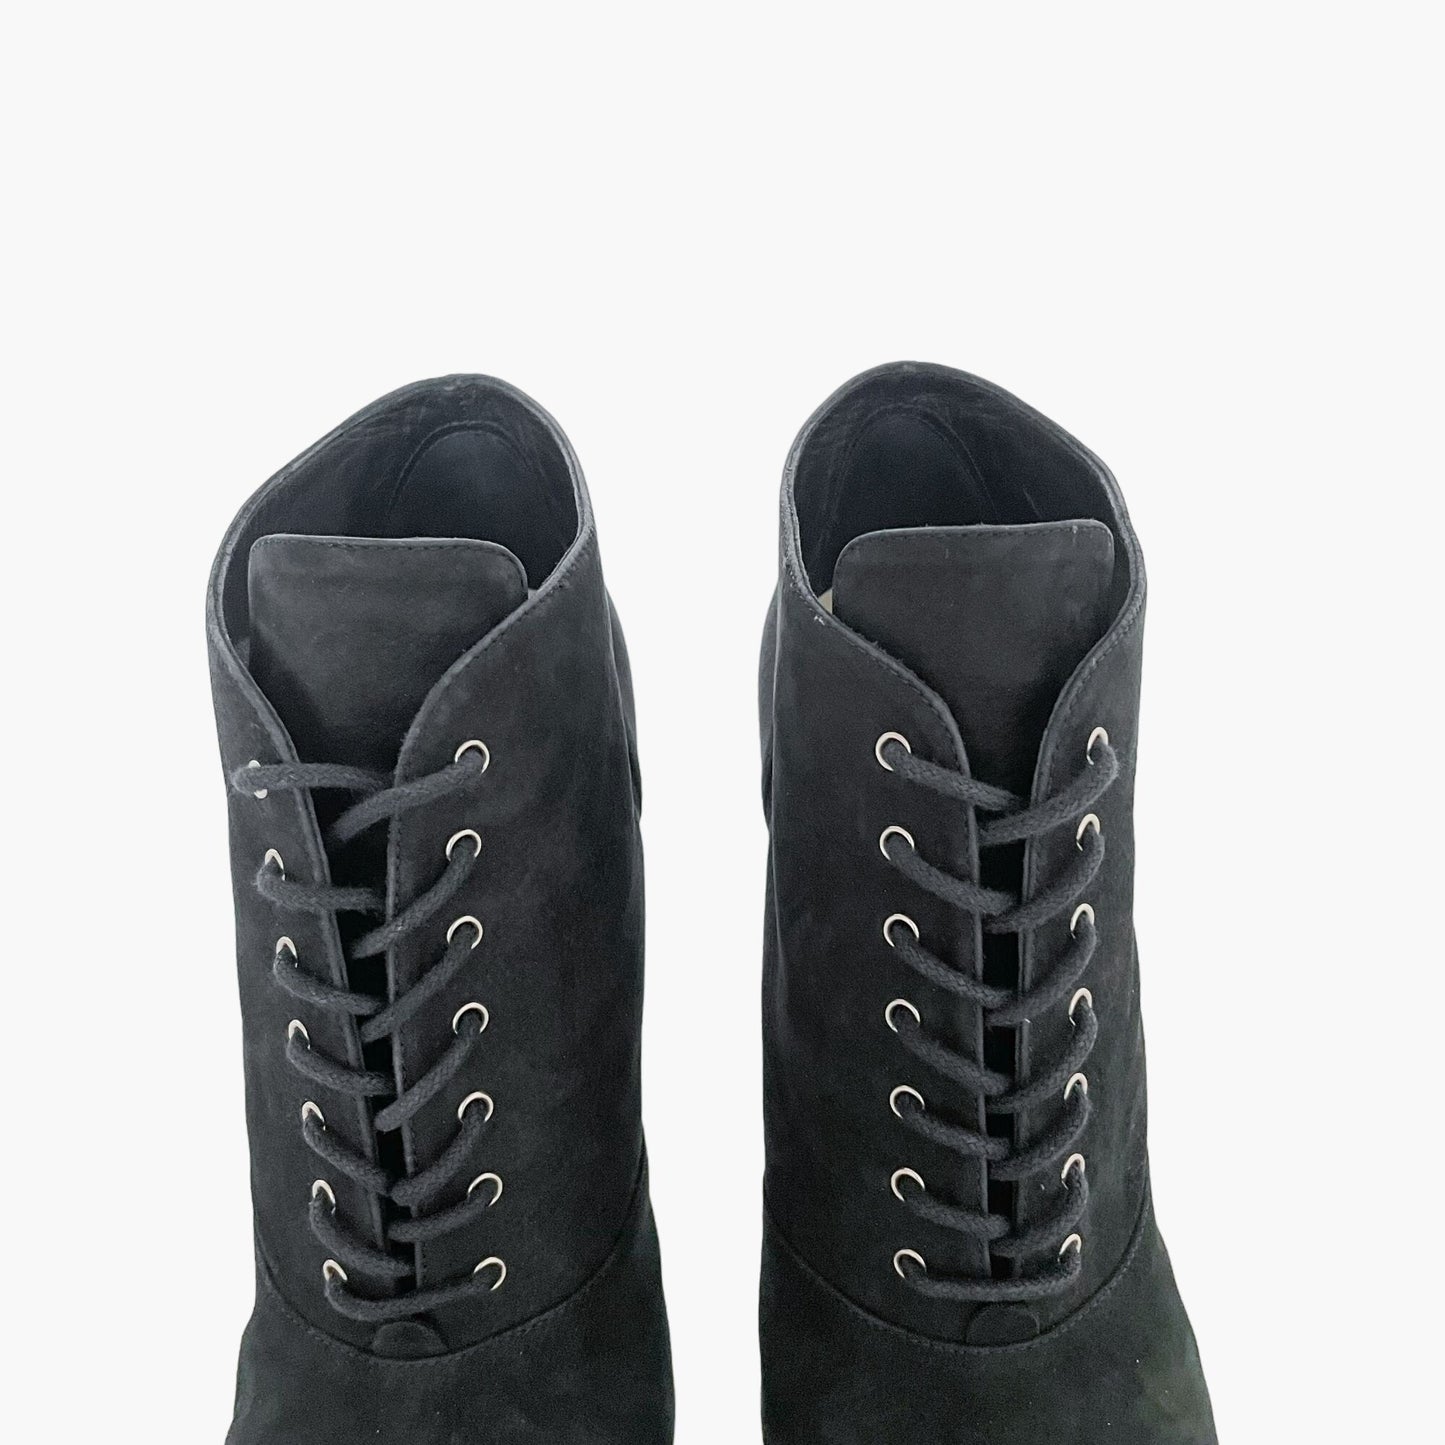 Chanel Lace-Up Booties in Black Suede Size 38.5